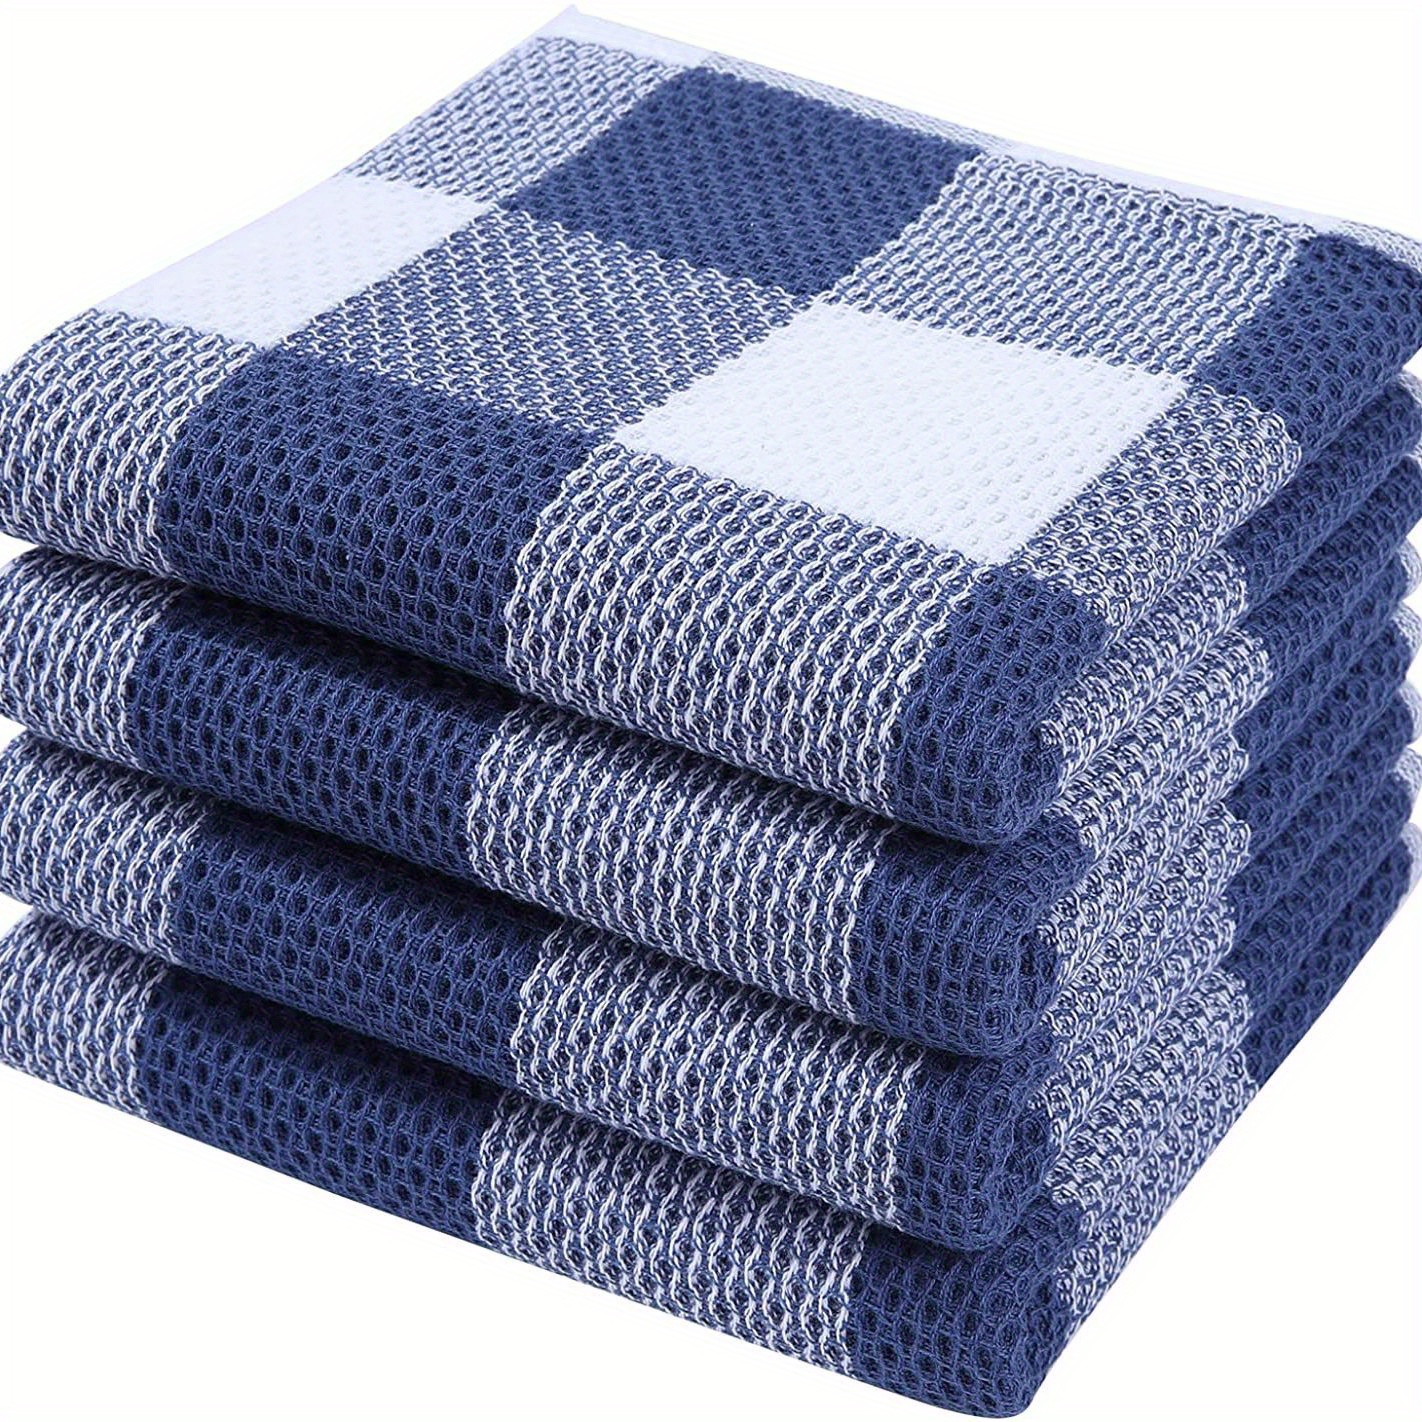 Set of 4 Dish Towels Super Absorbent 100%Cotton Waffle Weave Kitchen cloth  13.8"